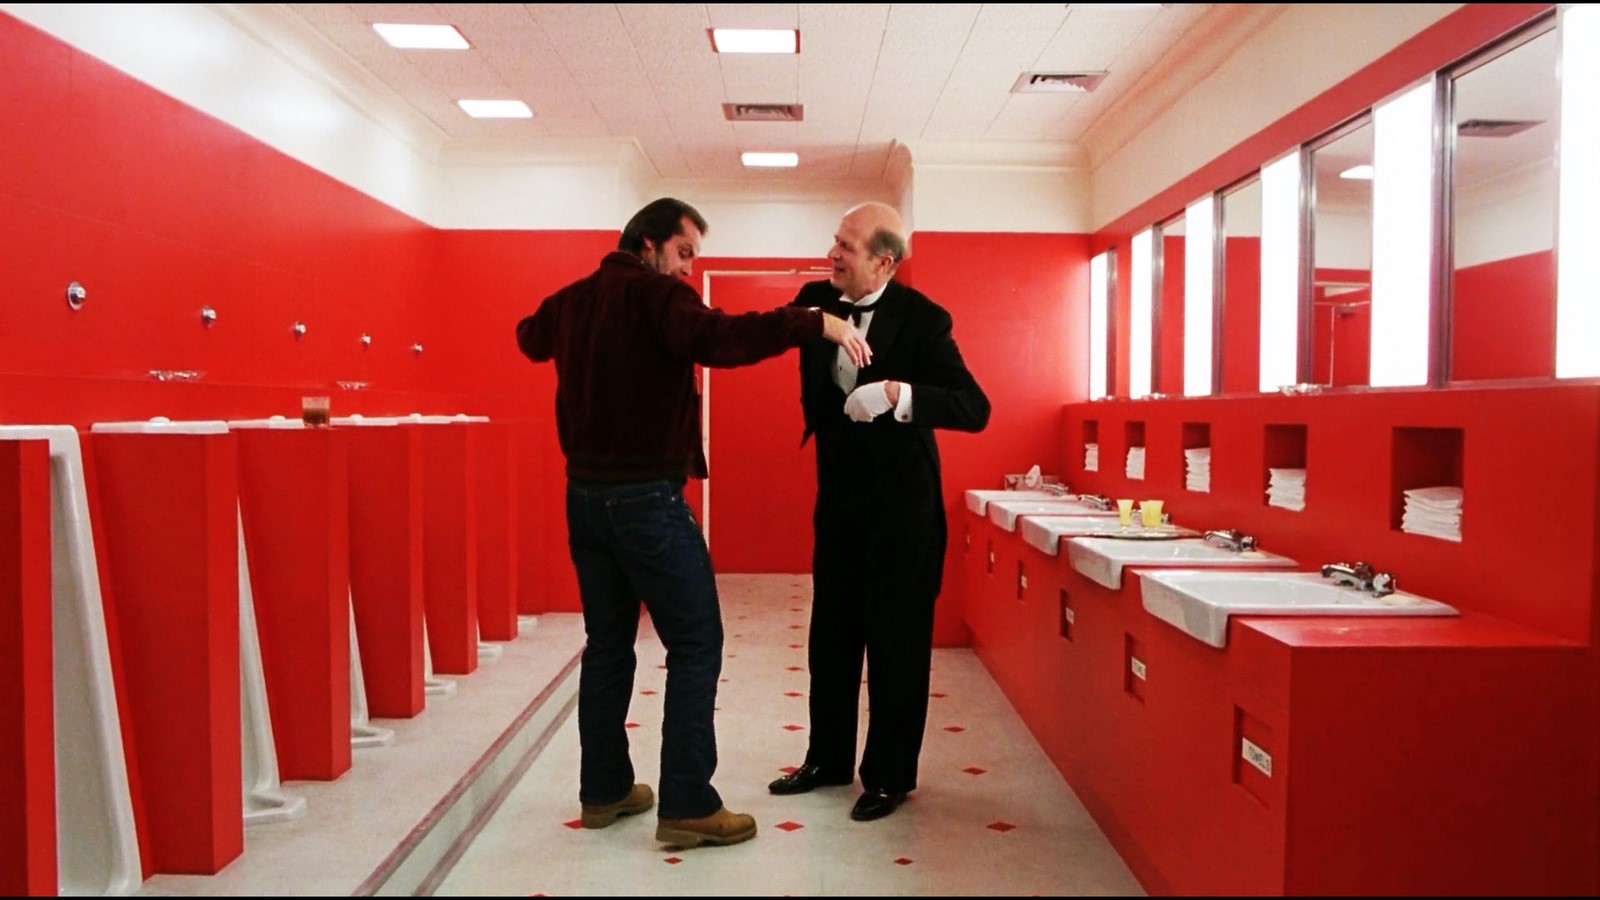 An architectural review of The Shining  - Sheet2